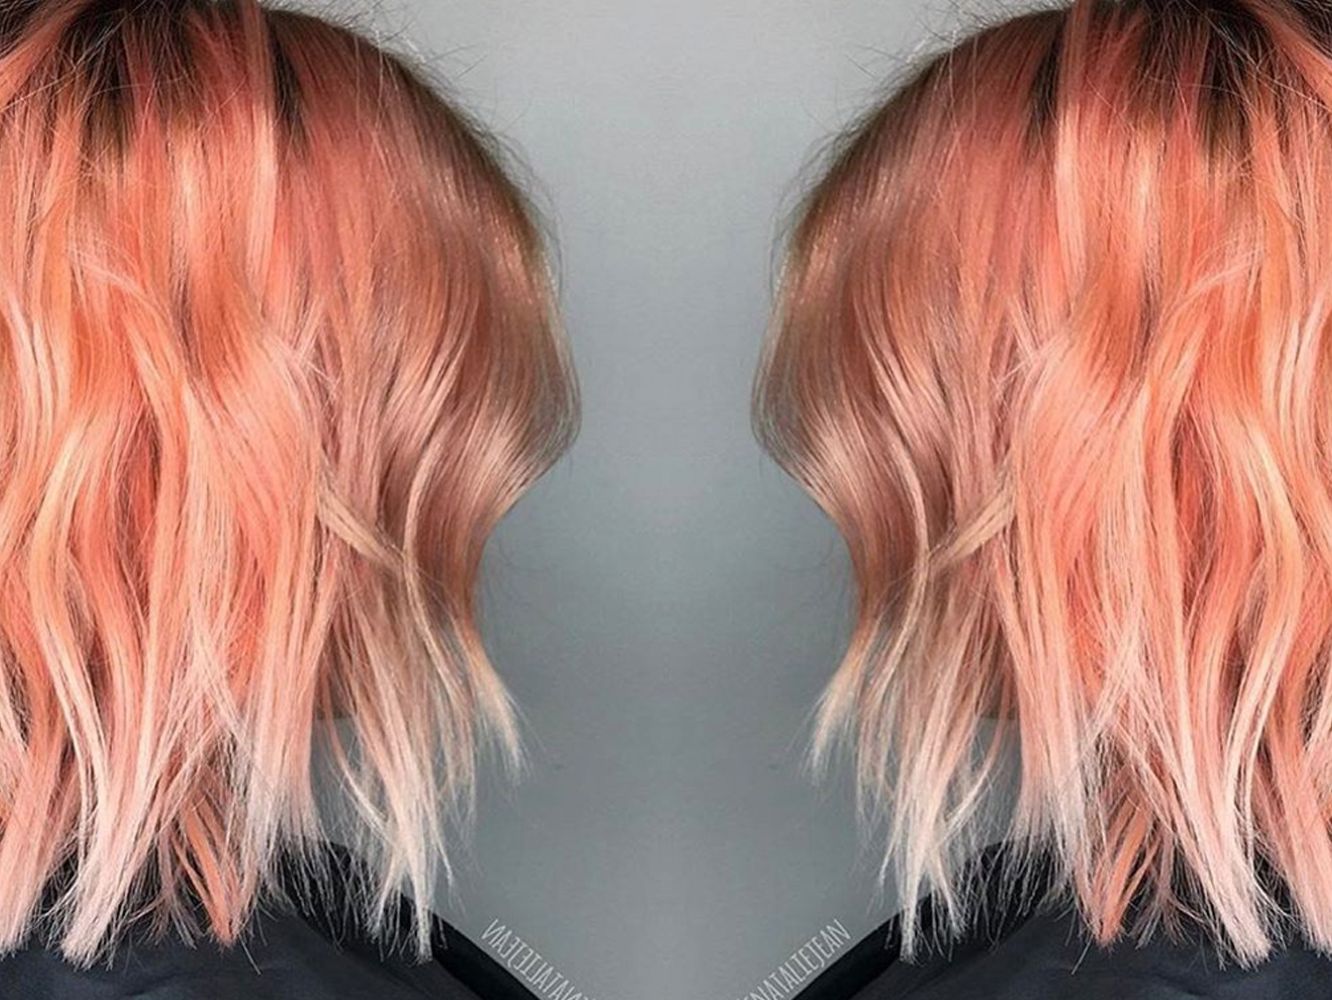 rose hair color